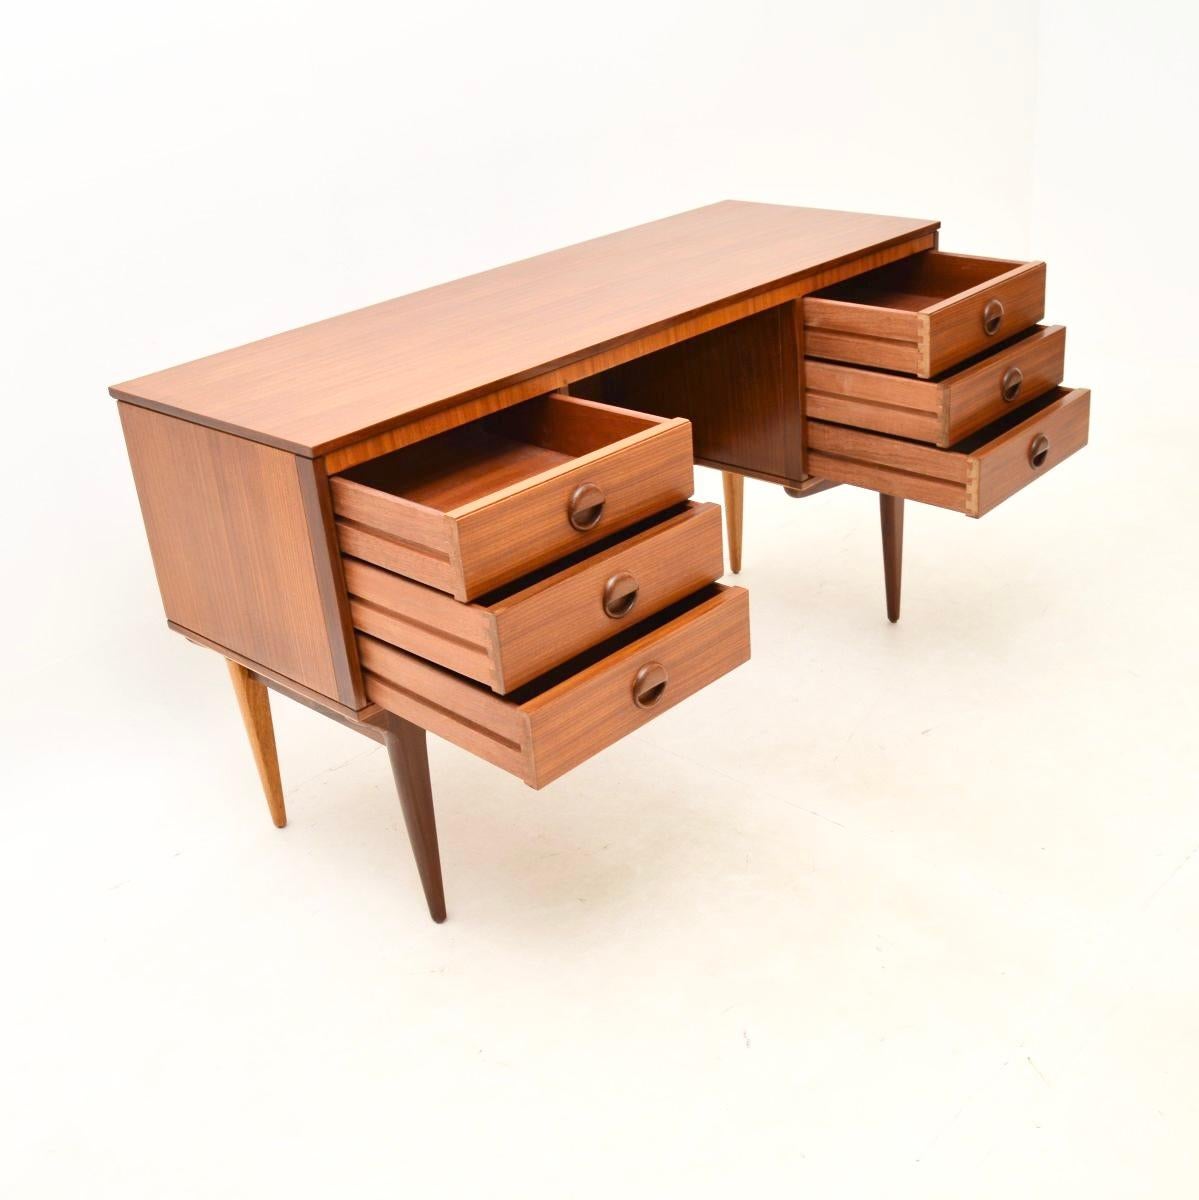 A stylish and very practical vintage walnut desk, made in England and dating from the 1960’s.

The quality is superb, this is beautifully designed with lovely round sculptural handles and stylish tapered legs. The walnut has a beautiful colour tone